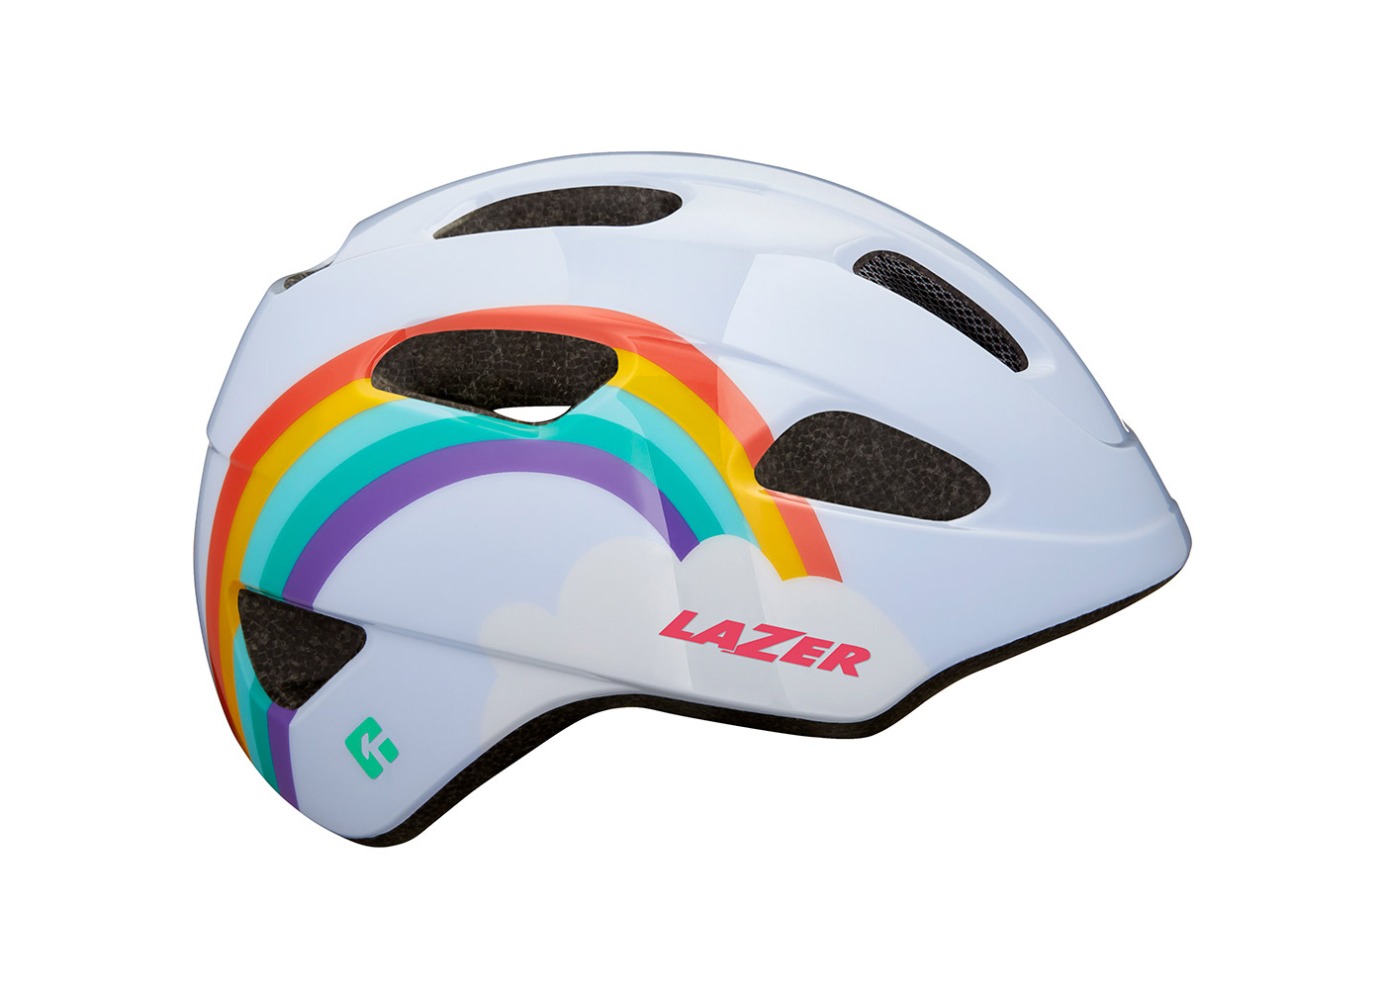 Best helmets for babies and toddlers: side view of the Lazer Pnut helmet with a rainbow graphic 